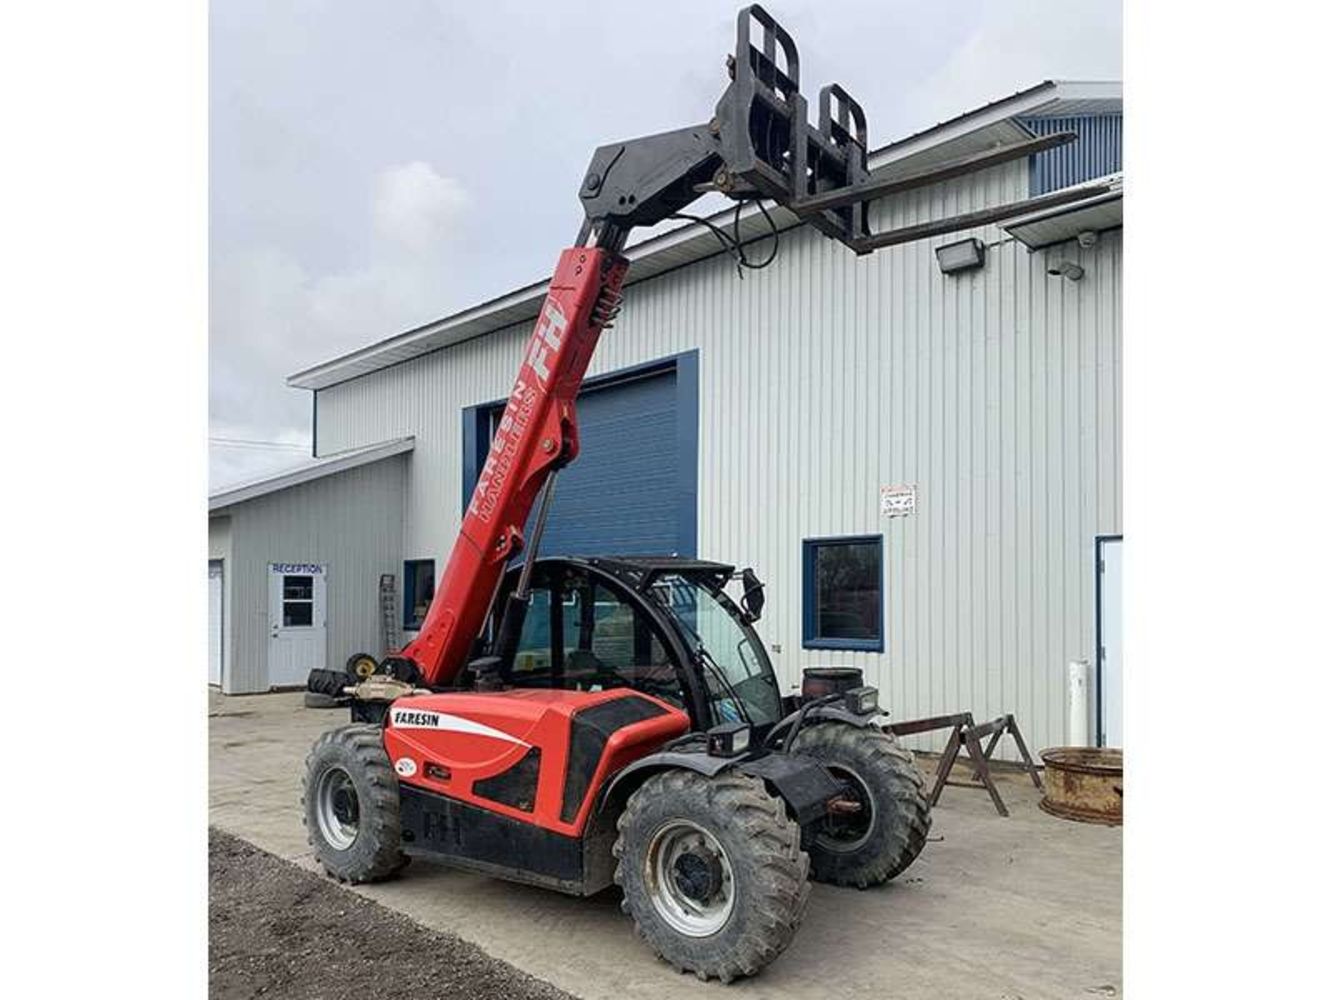 Auction of Assets of Samson Group – MINT Fab Facility With Forklifts, Cabinets, Positioners & More ***NEW LOTS ADDED DAILY***